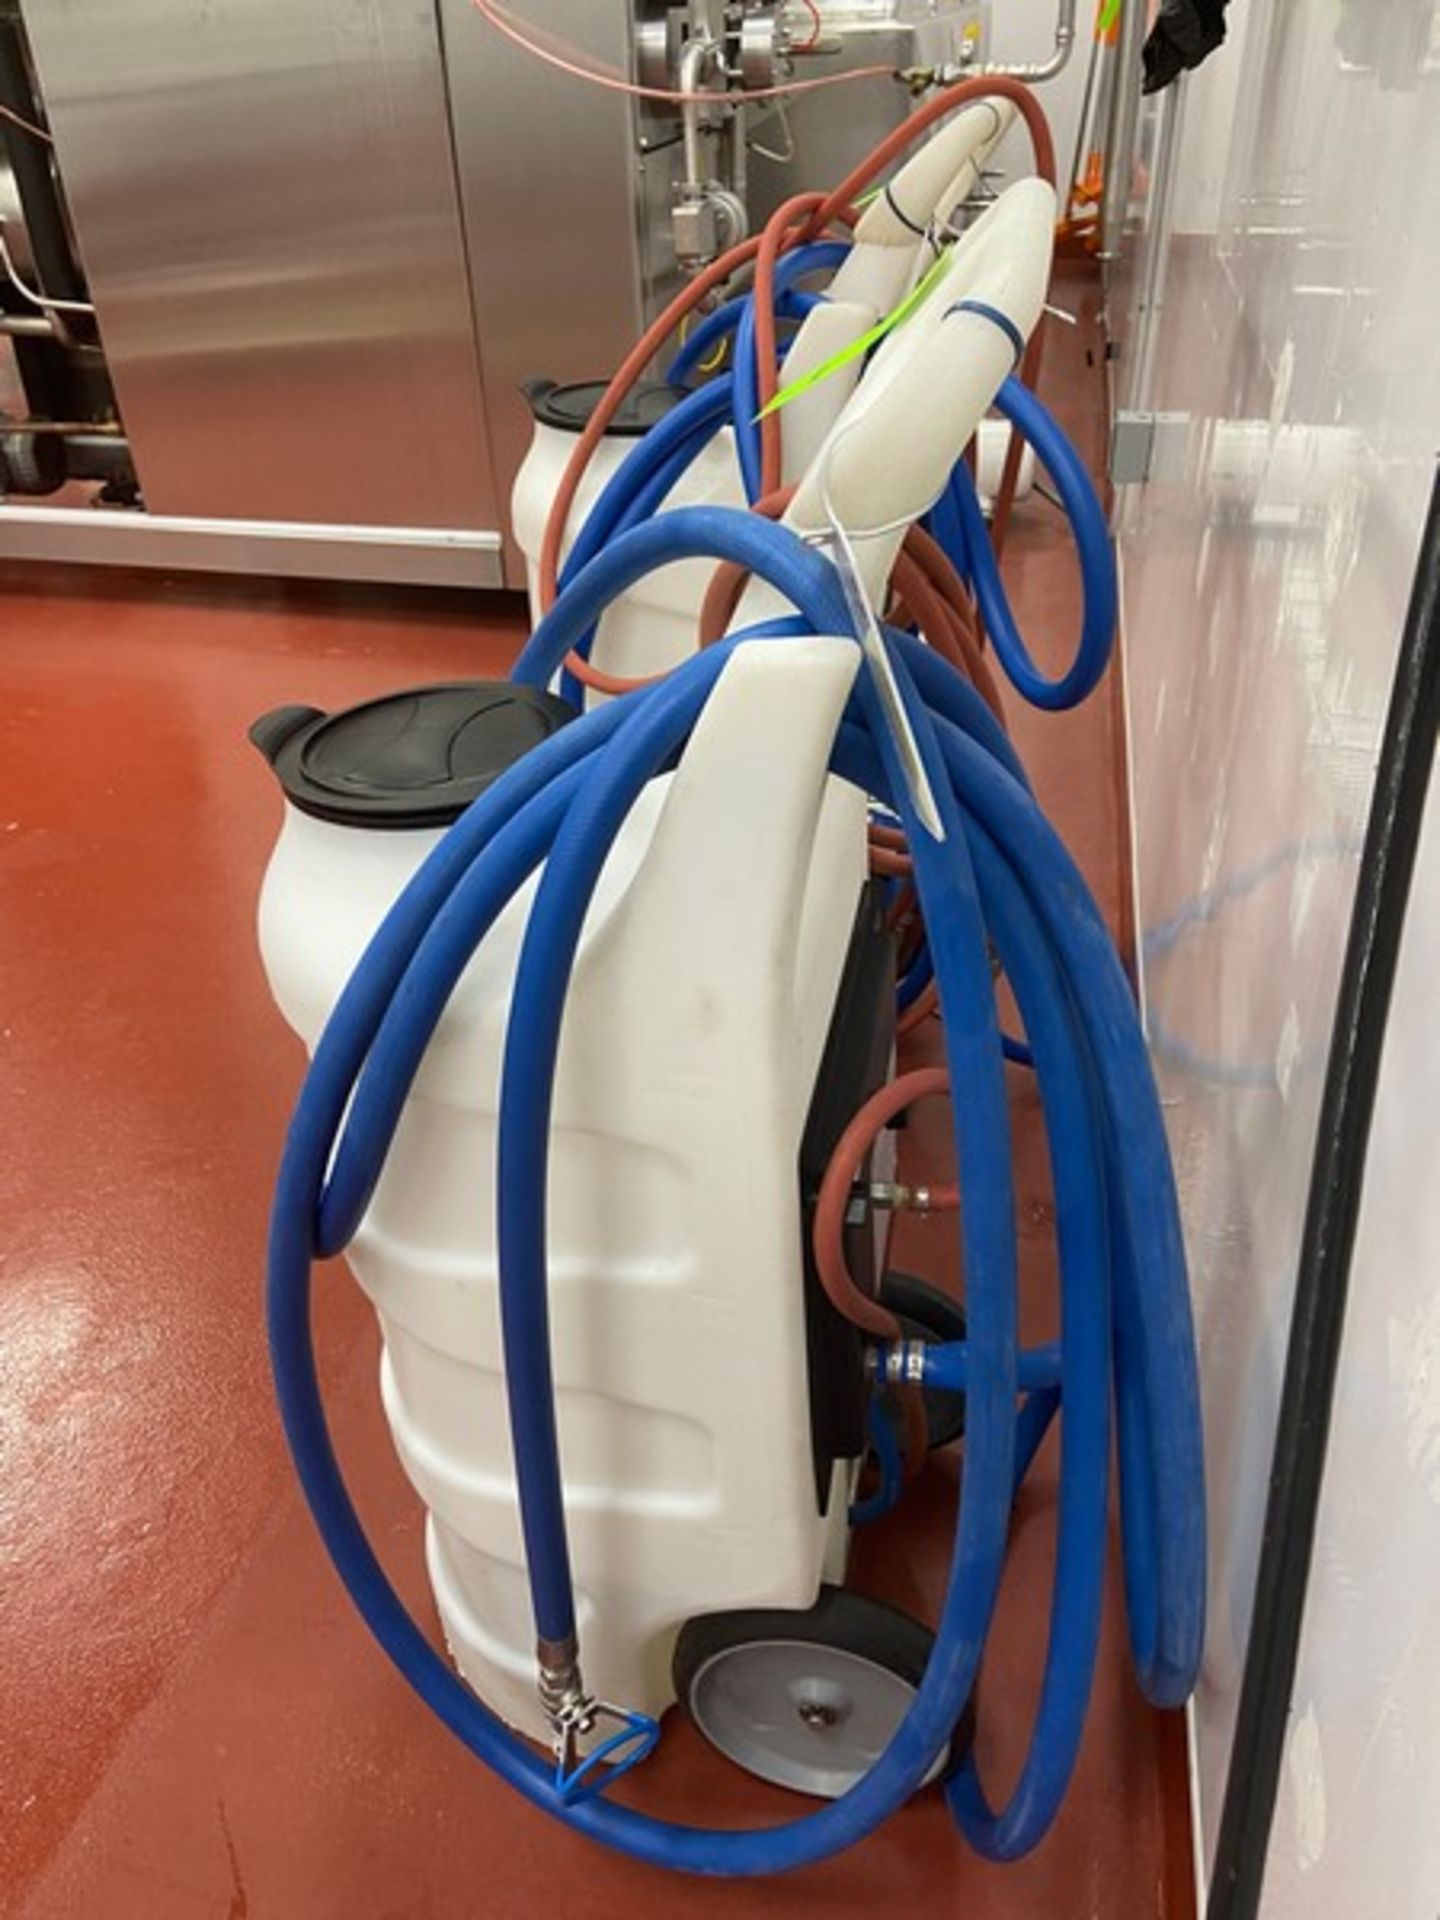 Hydrite Chemical Co. Portable Foamer, Plastic Design, Mounted on Casters, with Associated Hoses & - Image 3 of 3